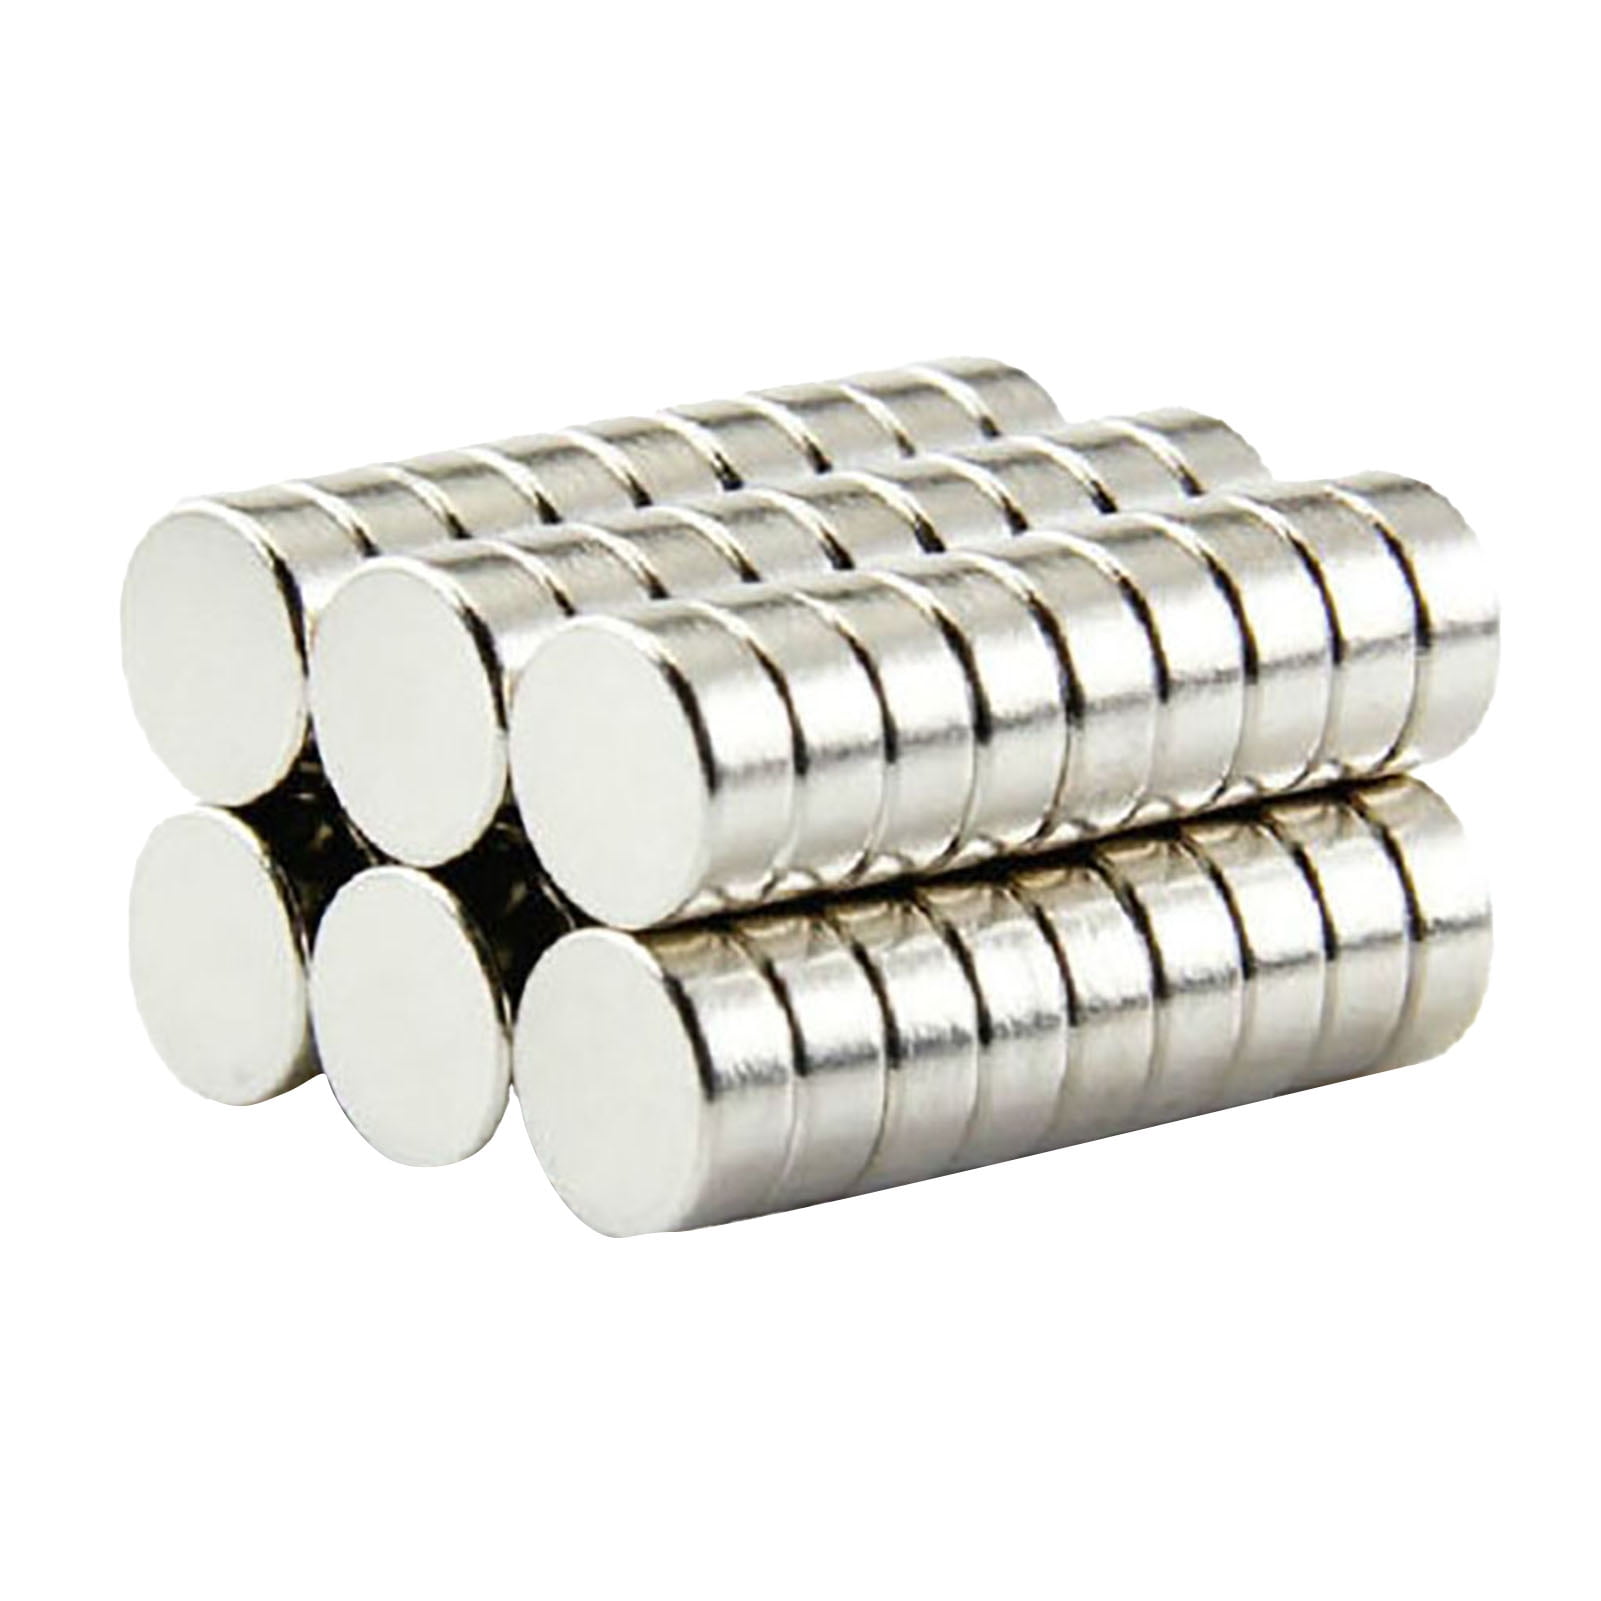 Neodymium Disc Magnets 8Pcs Magnets with Double-sided Adhesive 8Pcs Mini Magnets Multi-Use for Fridge door Whiteboard Magnetic map Magnetic Screen Door Bulletin board Refrigerators 16PC